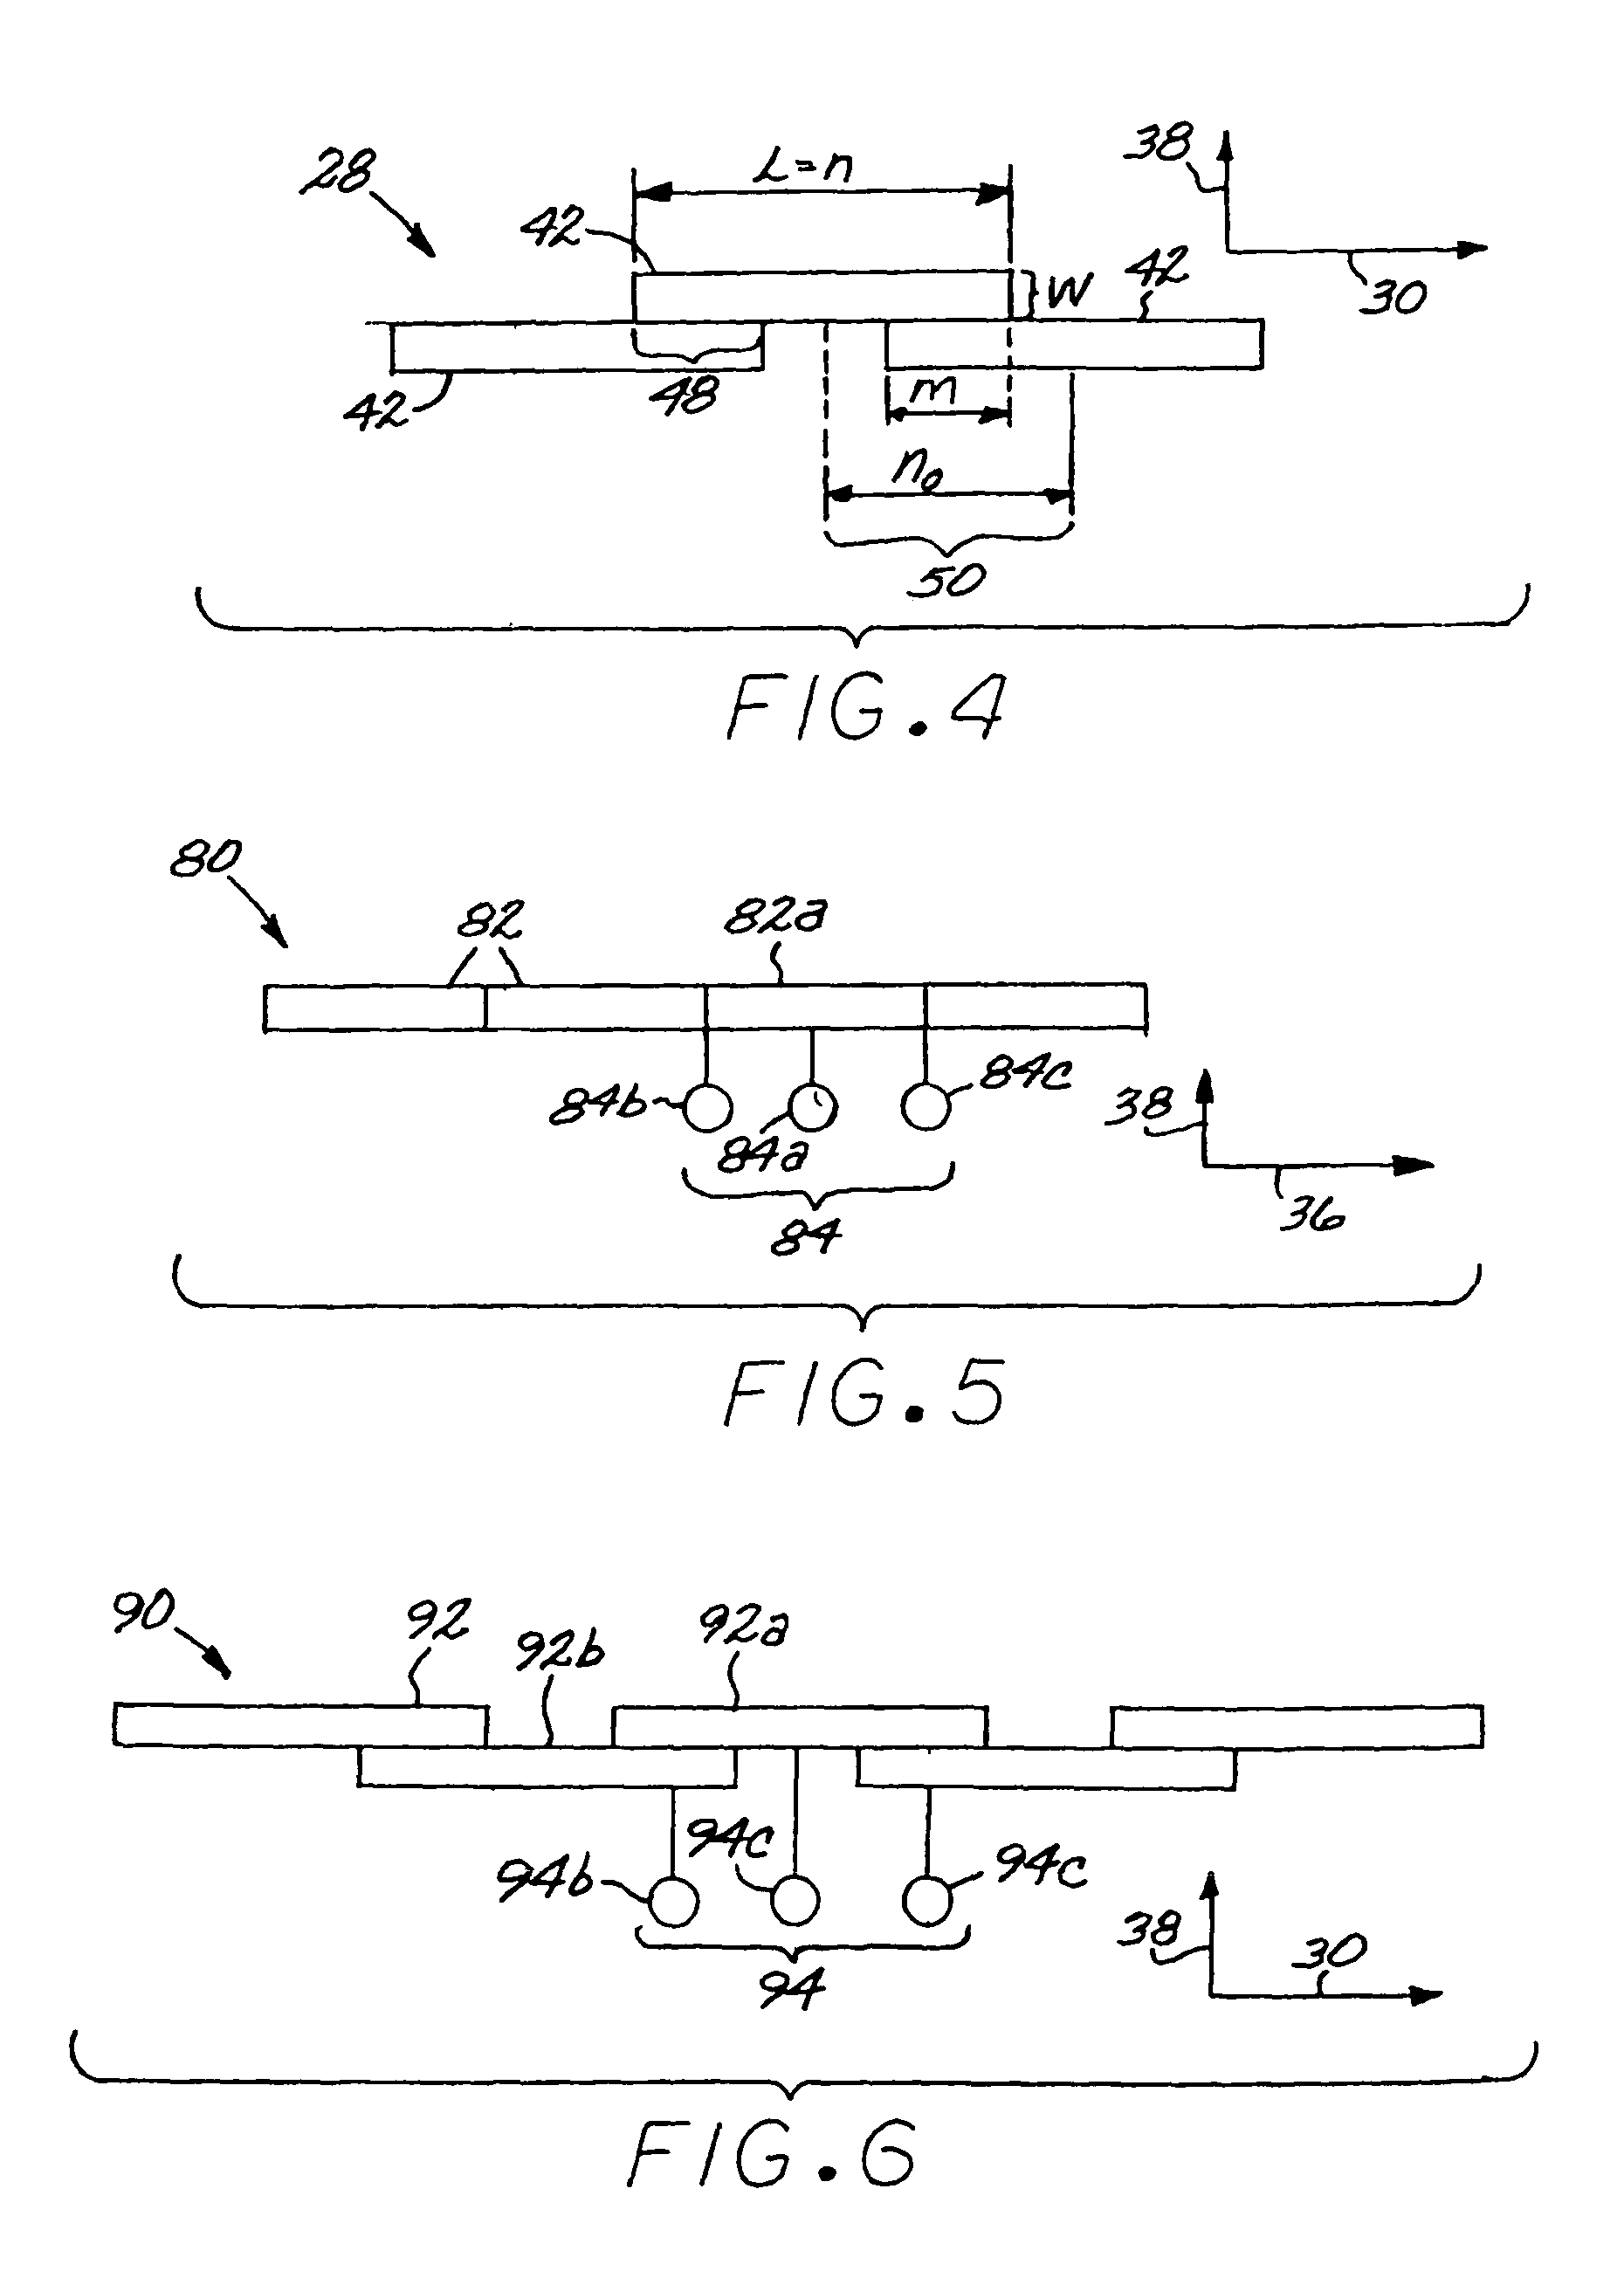 Imaging sensor system with staggered arrangement of imaging detector subelements, and method for locating a position of a feature in a scene